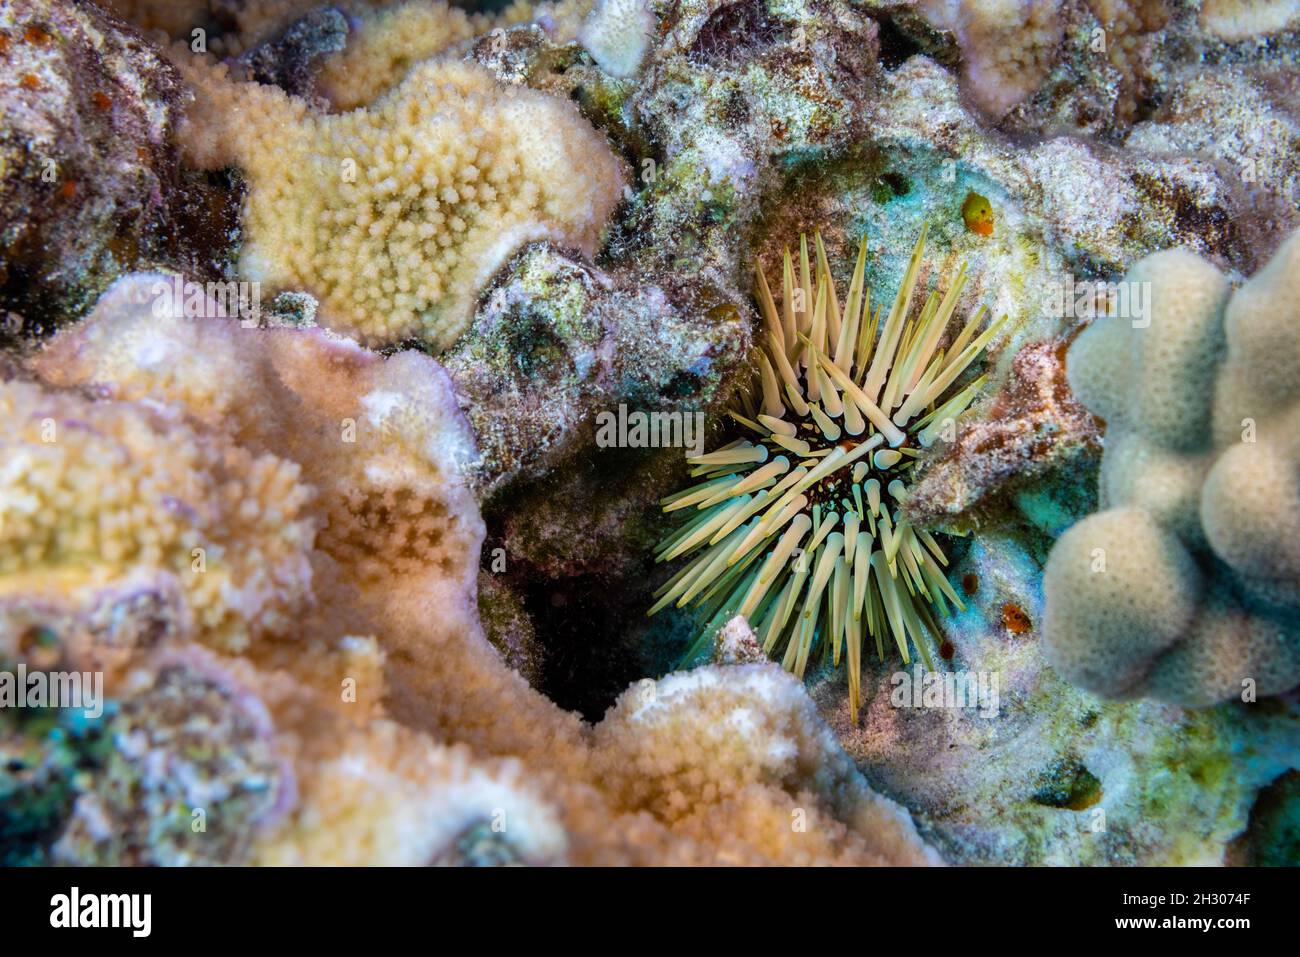 The rock-boring urchin, Echinometra mathaei, is also known as a burrowing urchin, Hawaii. This invertebrate grinds into solid limestone and excavates Stock Photo